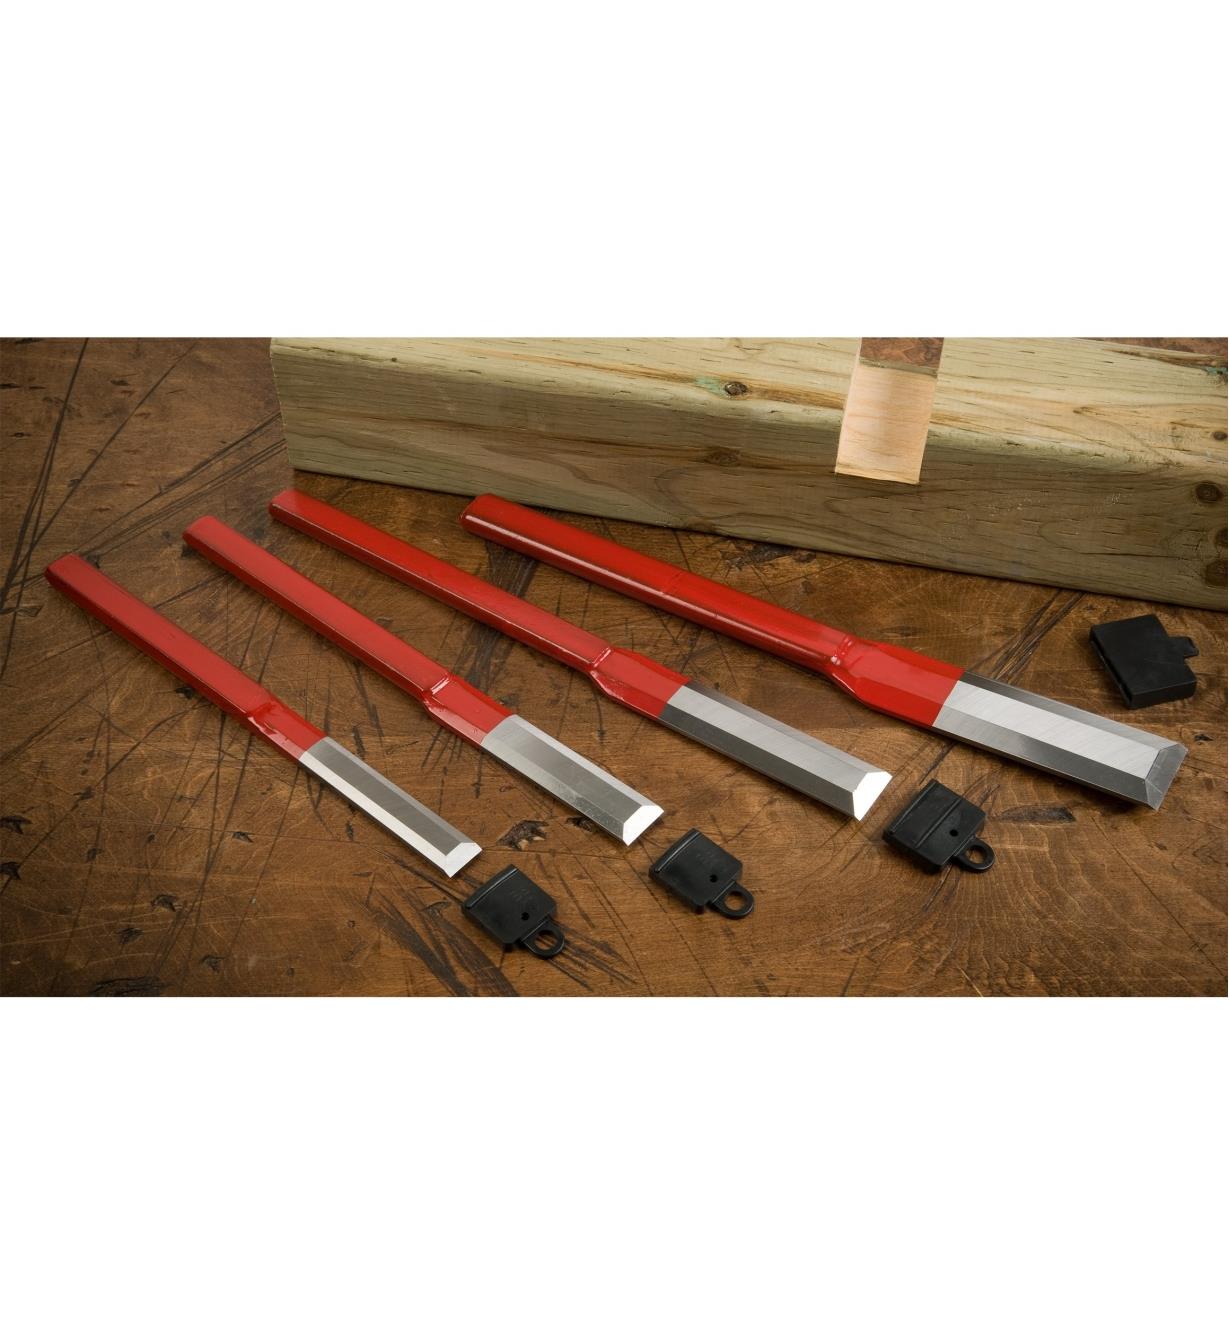 Carpenter's Chisels lying on a table with blade guards and a block of wood